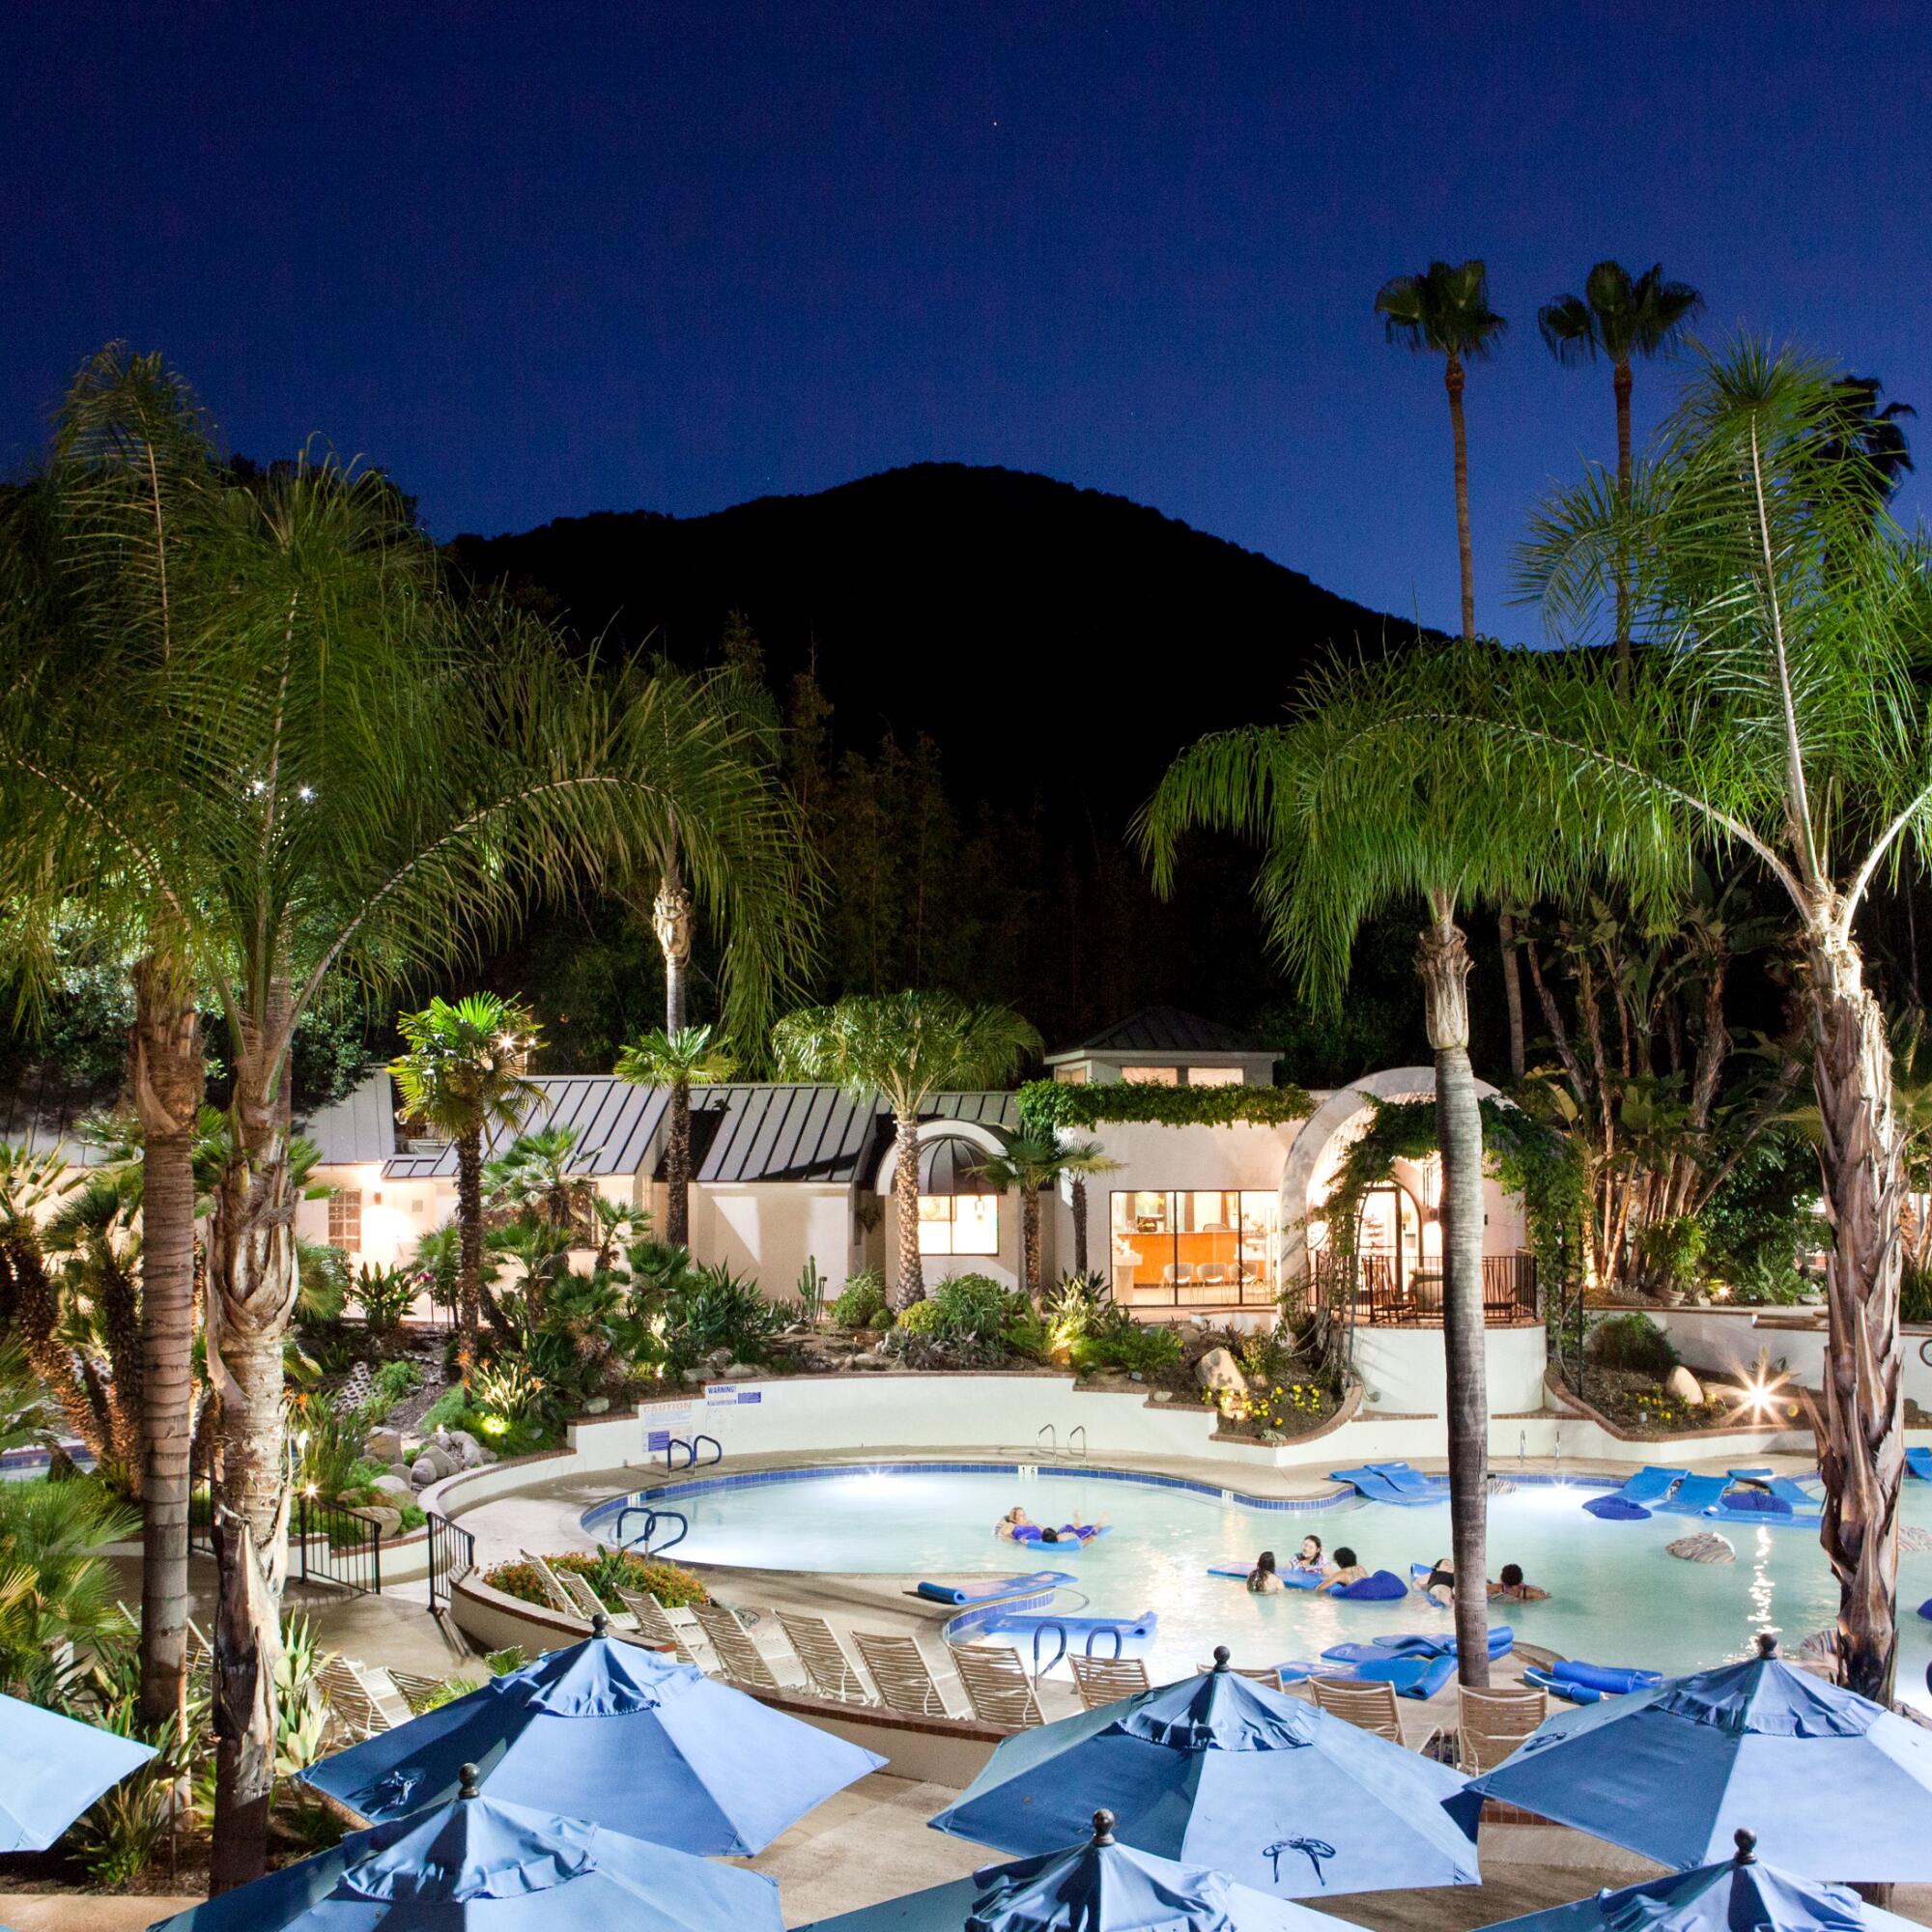 A pool at nighttime, surrounded by cabanas and palm trees.